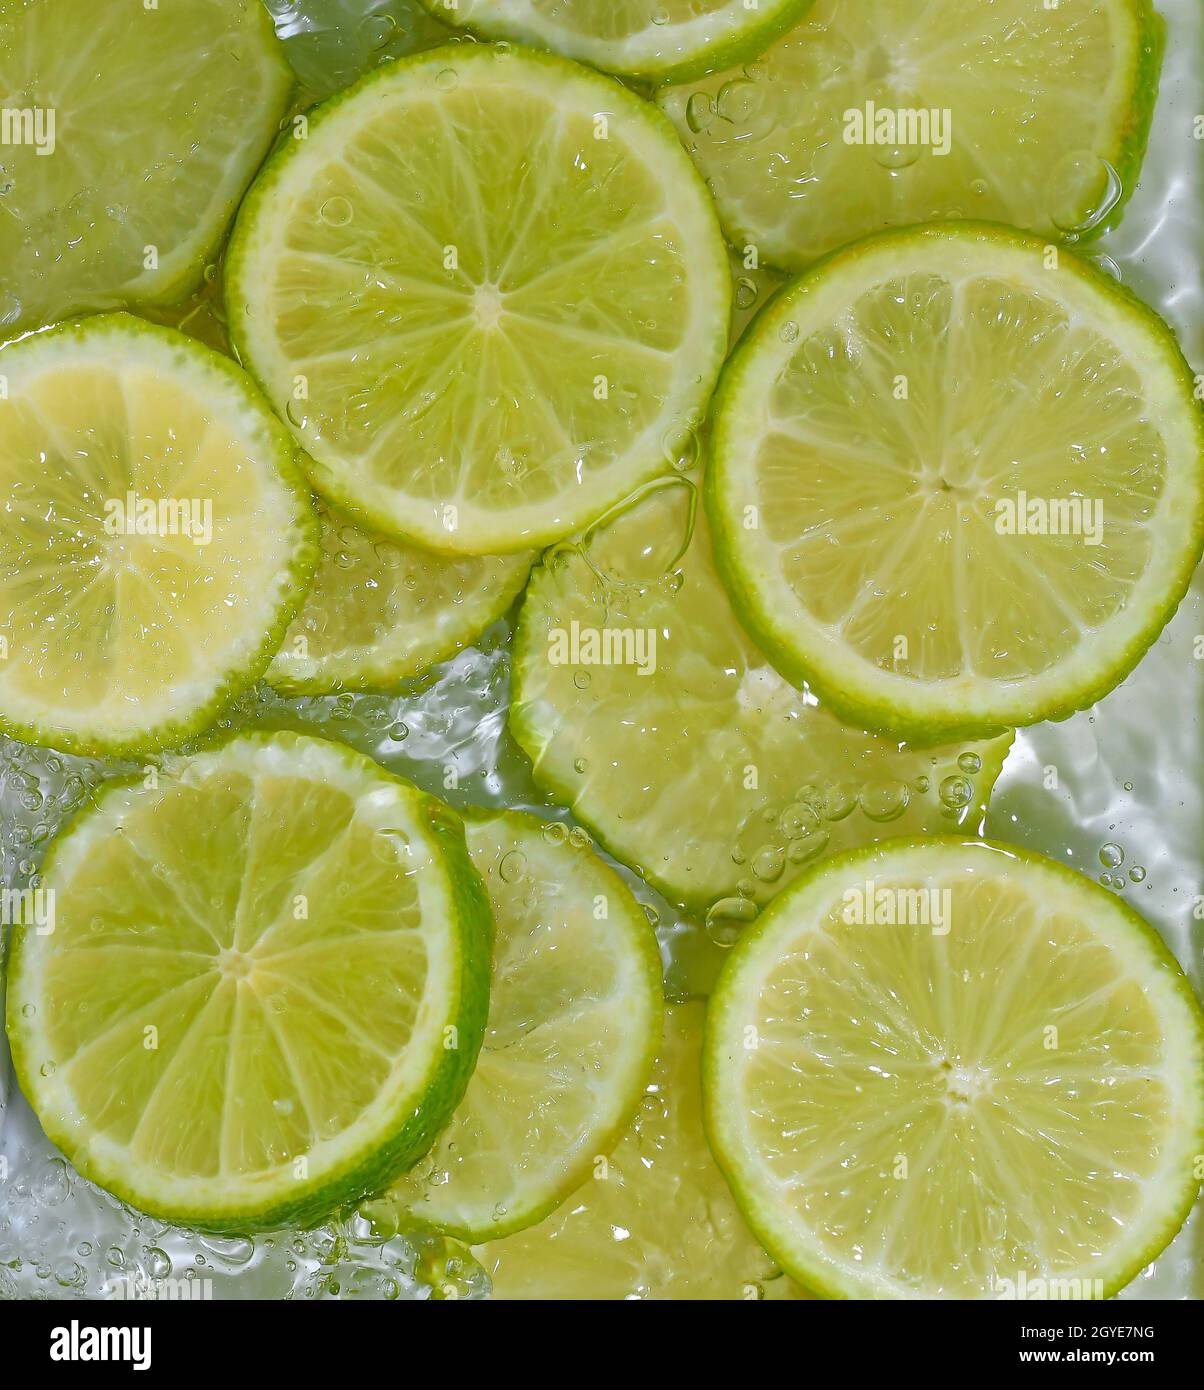 Close-up fresh slices of green limes on white background. Slices of limes in sparkling water on white background, closeup. Citrus soda. Stock Photo